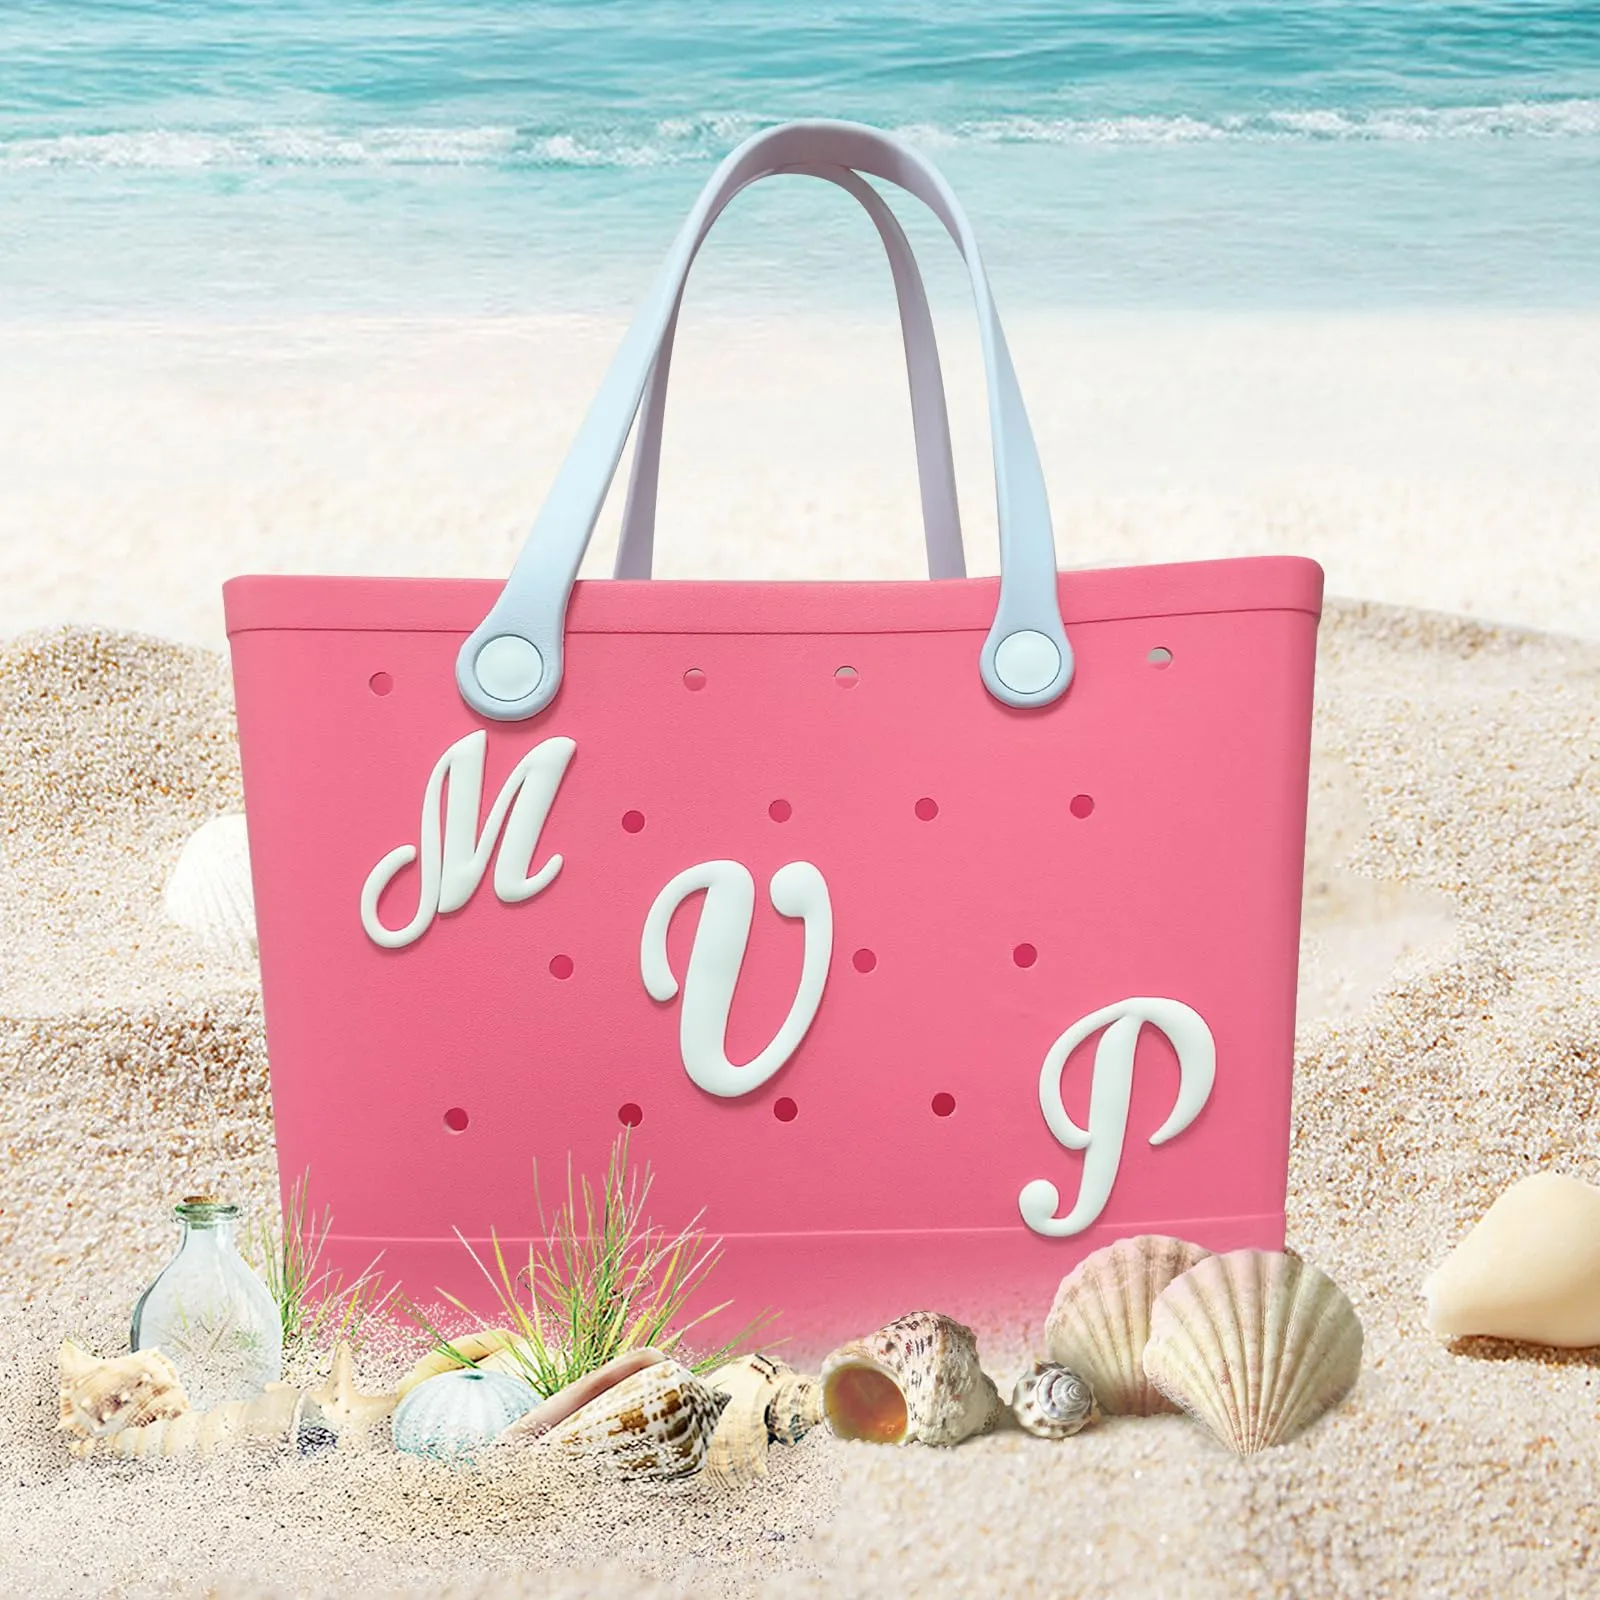 bag charms compatible with bogg bag accessories insert decorative alphabet lettering for bogg bag personalize your beach tote rubber beach bag accessories with alphabet letters s